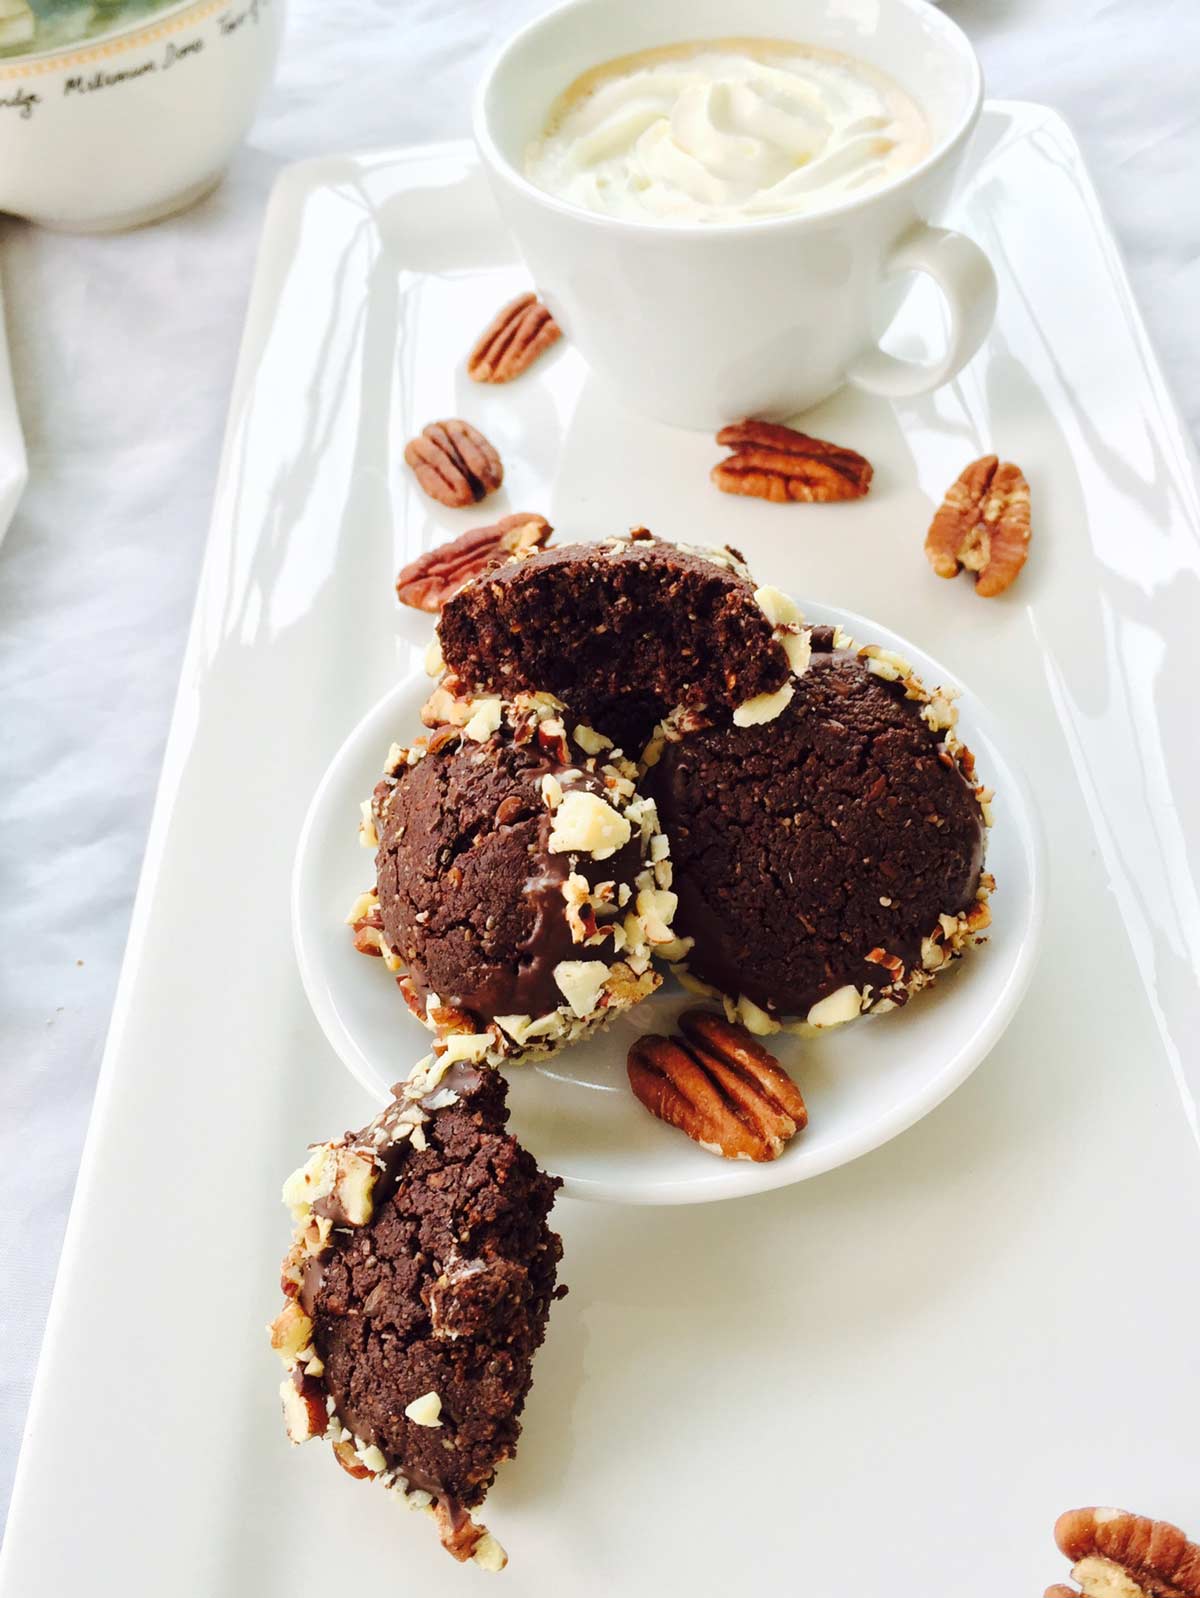 These flaxseed, cacao and pecan nuts cookies are a gluten-free sweet and healthy dessert treat, suitable for all ages.